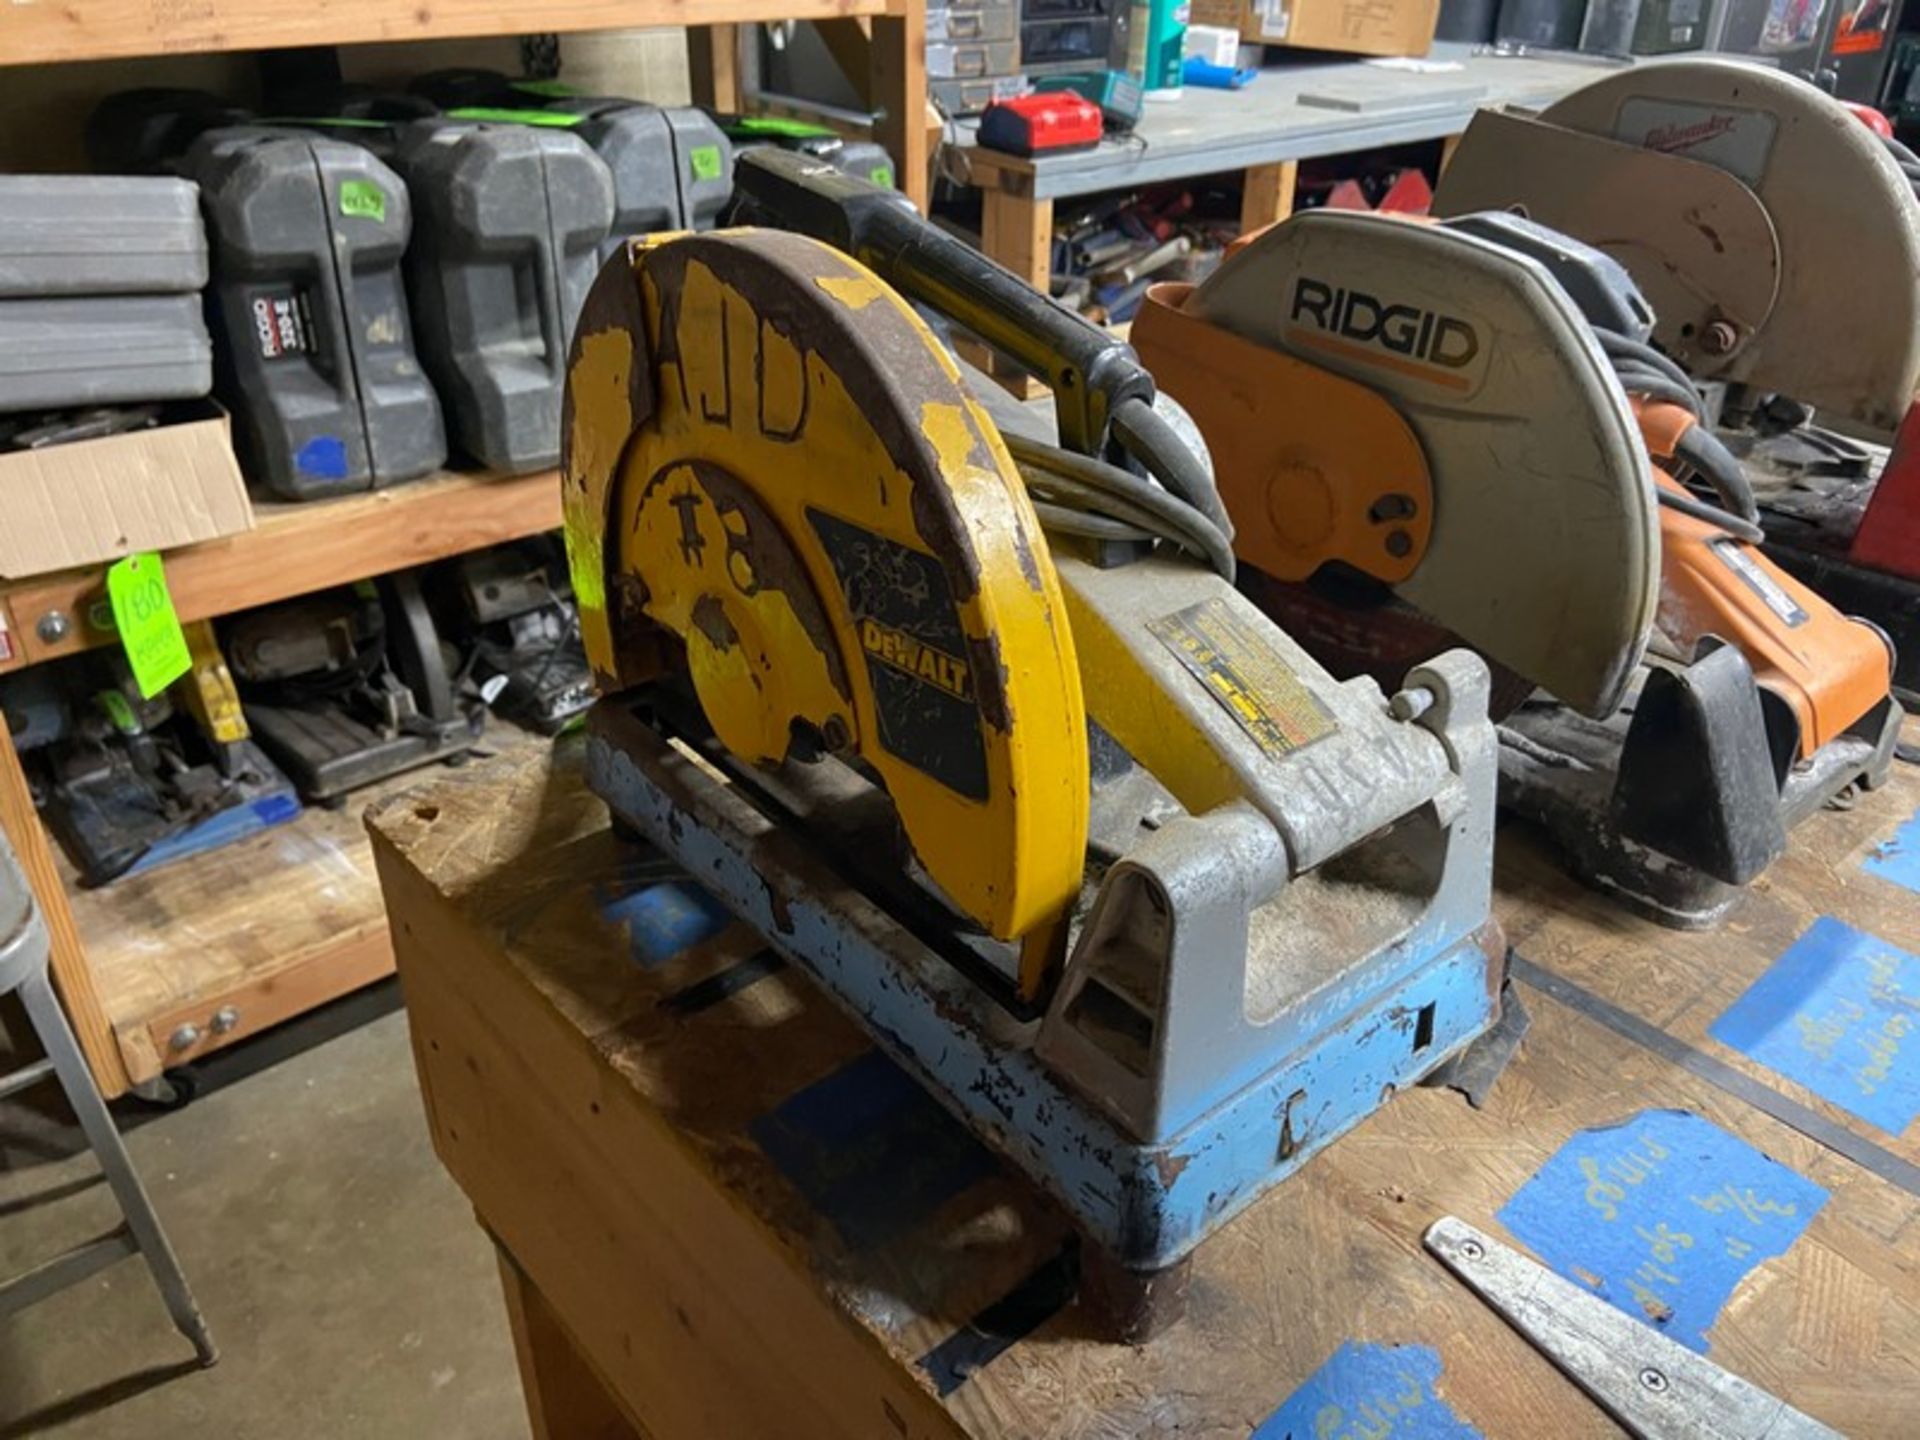 DeWalt 14” Abrasive Chop Saw, S/N 78523, 120 Volts (NOTE: No Blade) (LOCATED IN MONROEVILLE, PA)( - Image 3 of 5